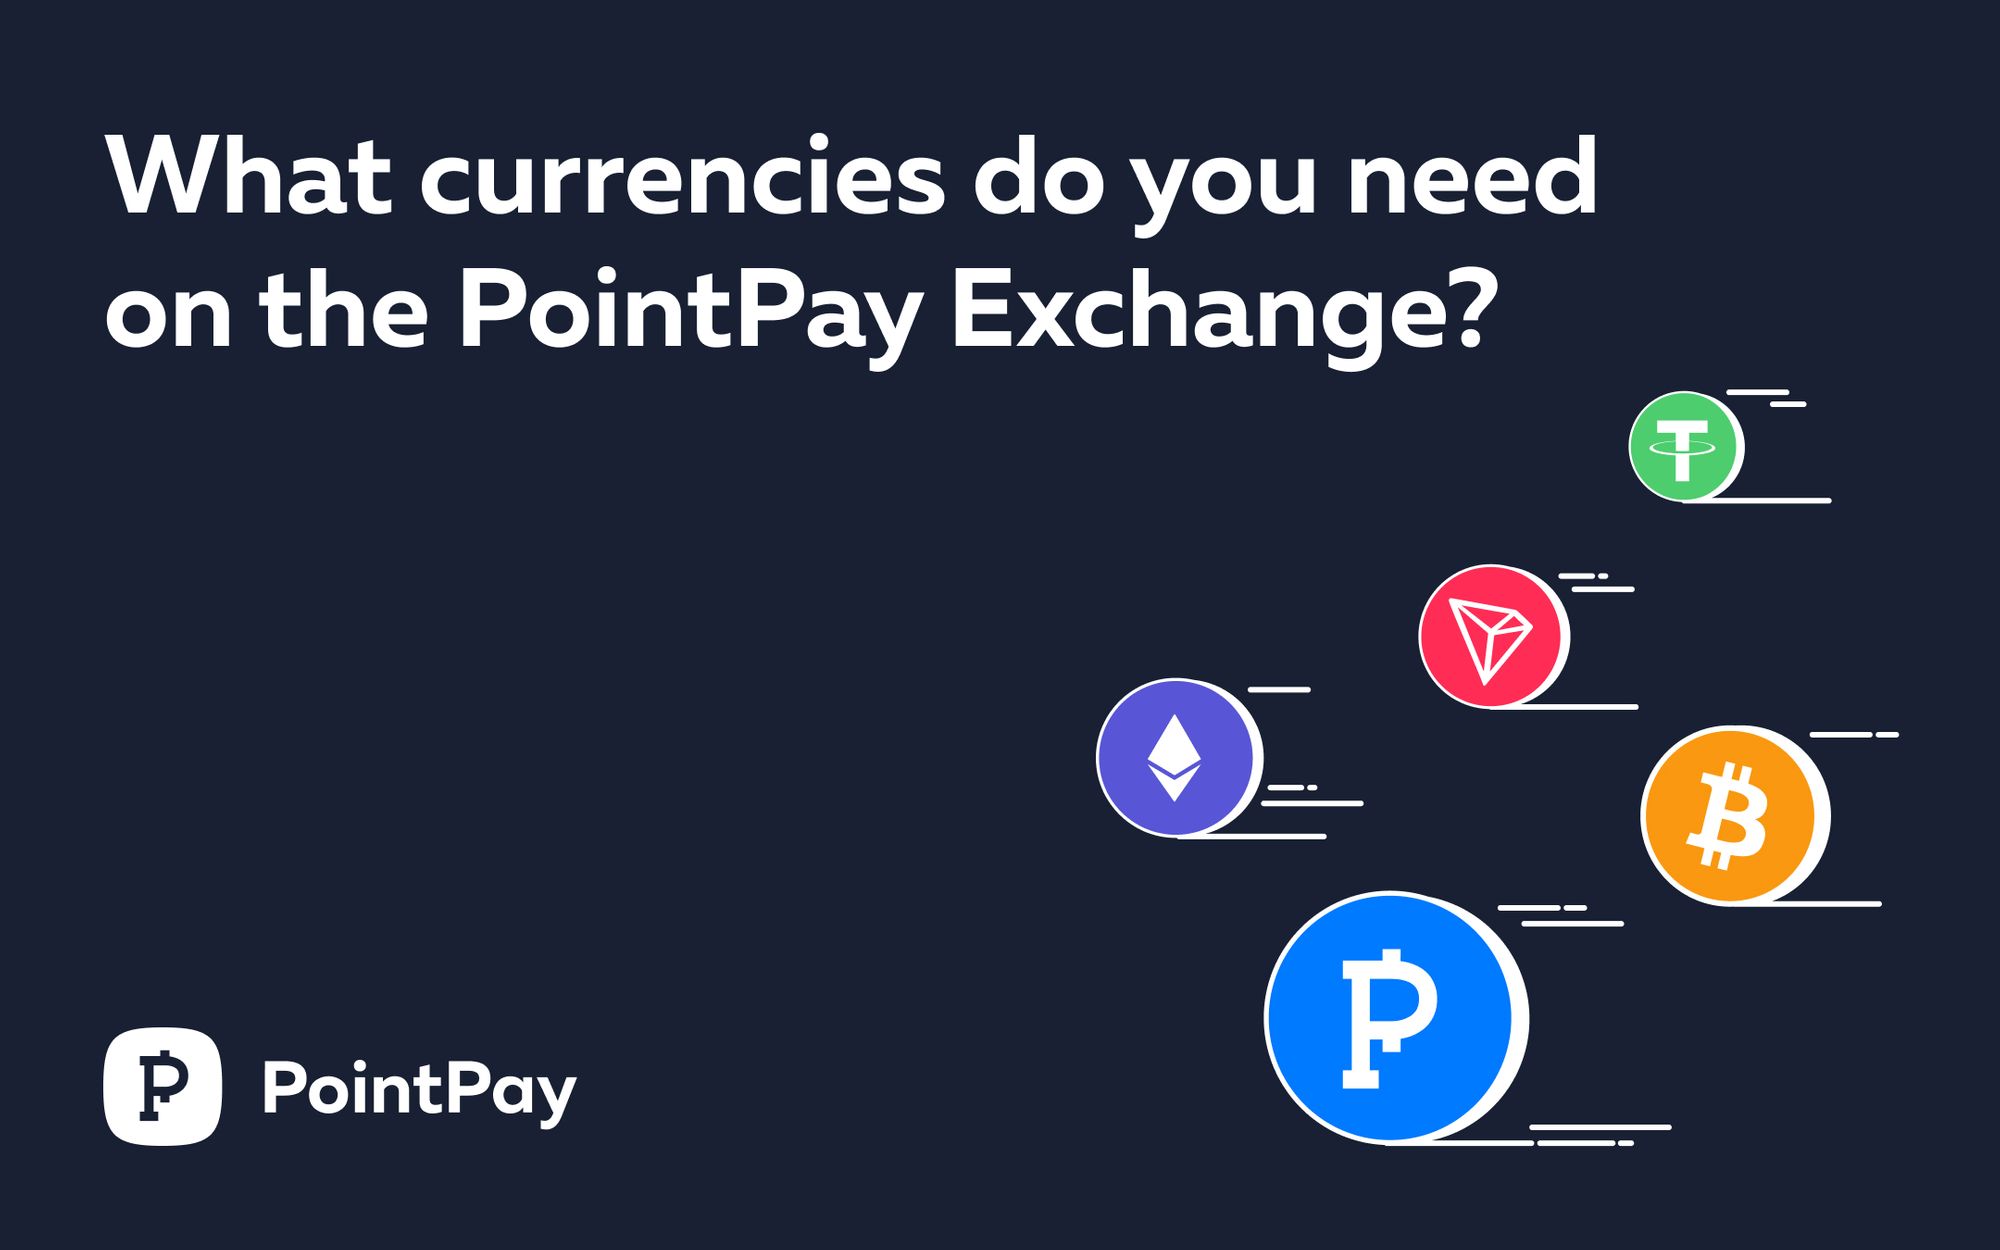 Choose new currencies to add to the PointPay exchange!